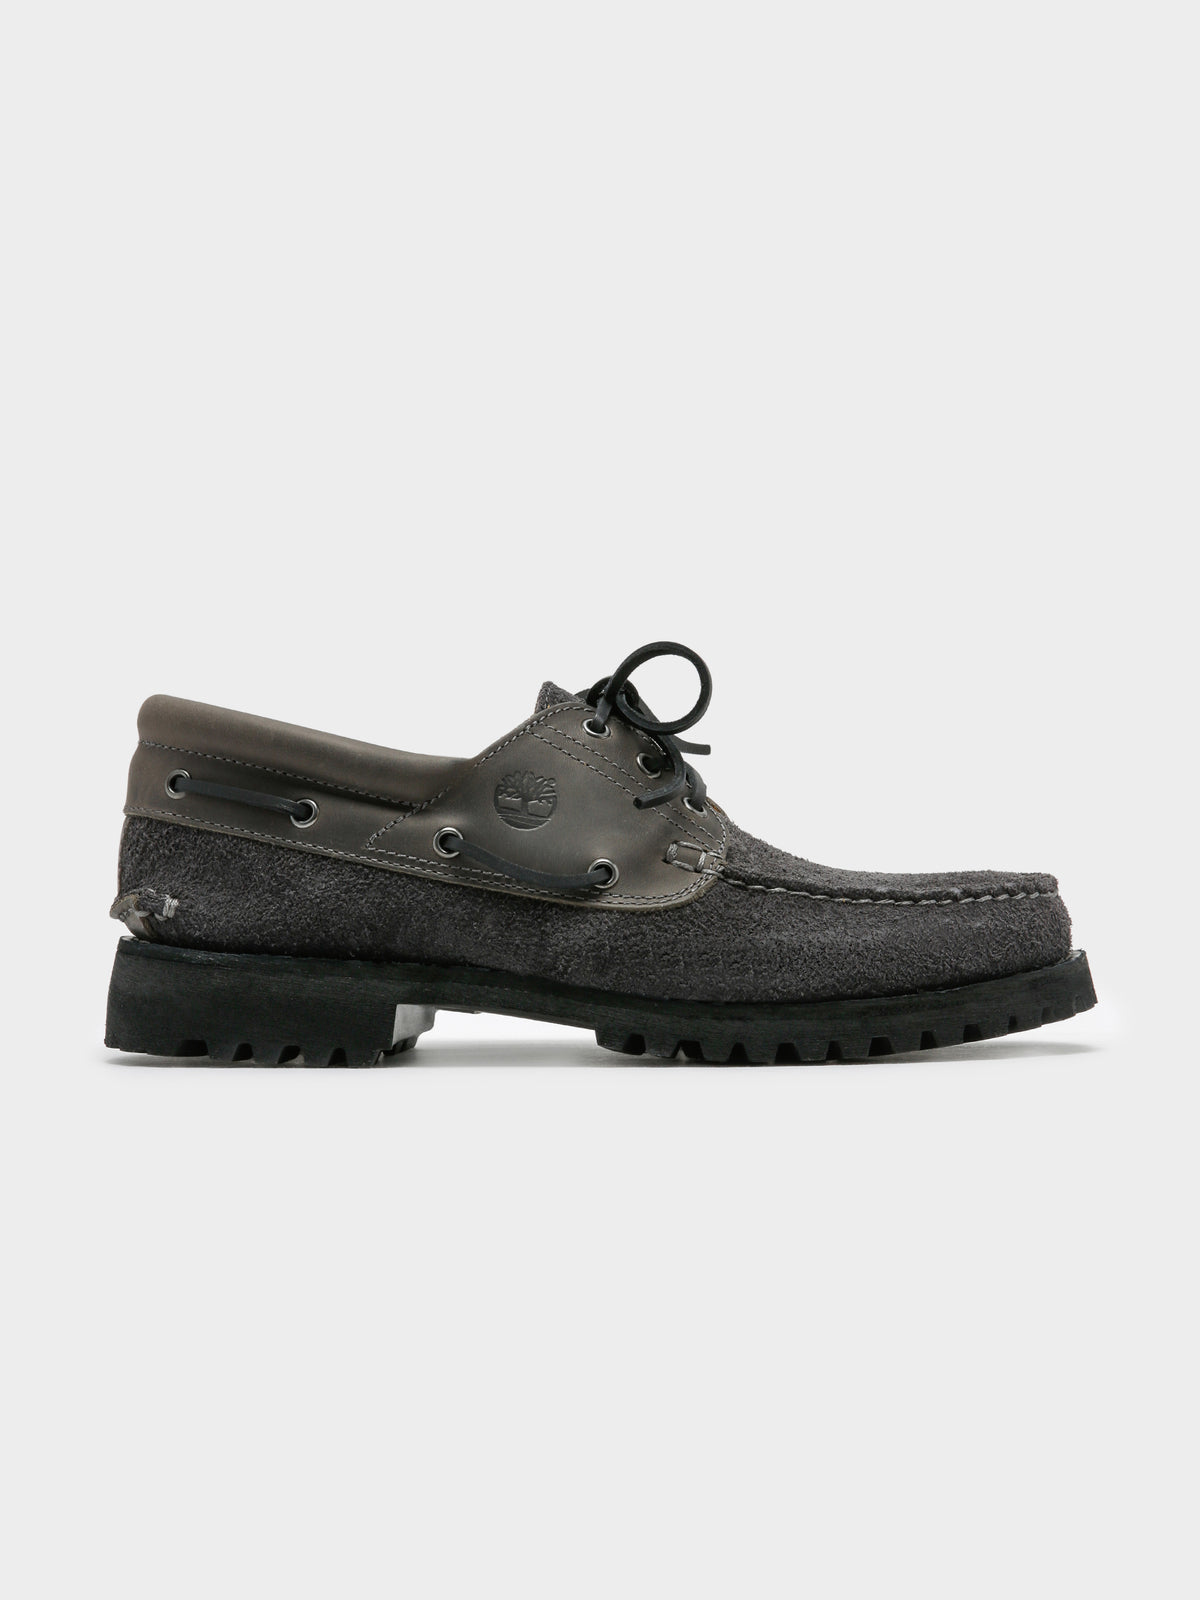 Mens Authentics 3 Eye Boat Shoes in Black